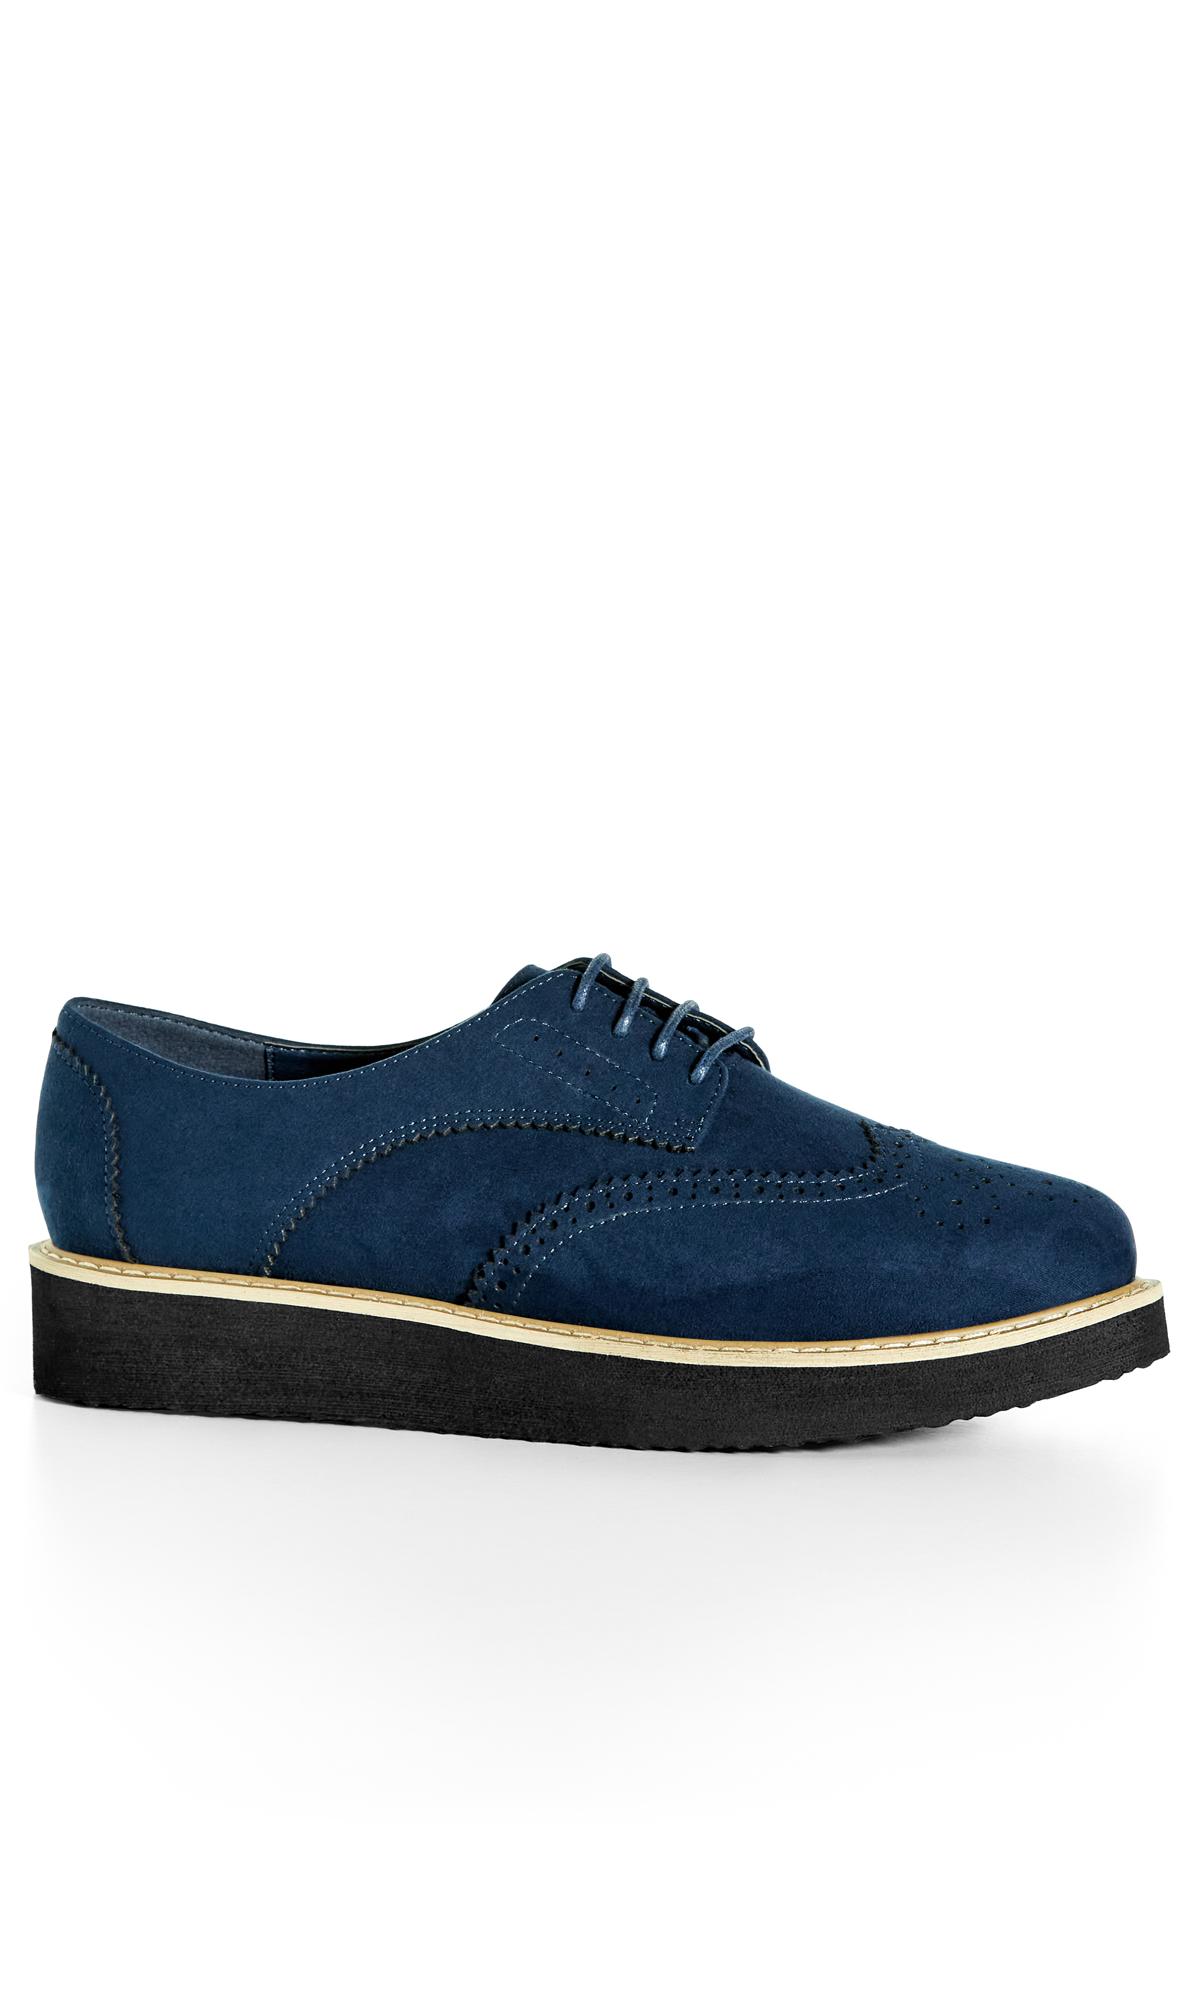 Greer Navy Brogue Wide Fit Shoes 1